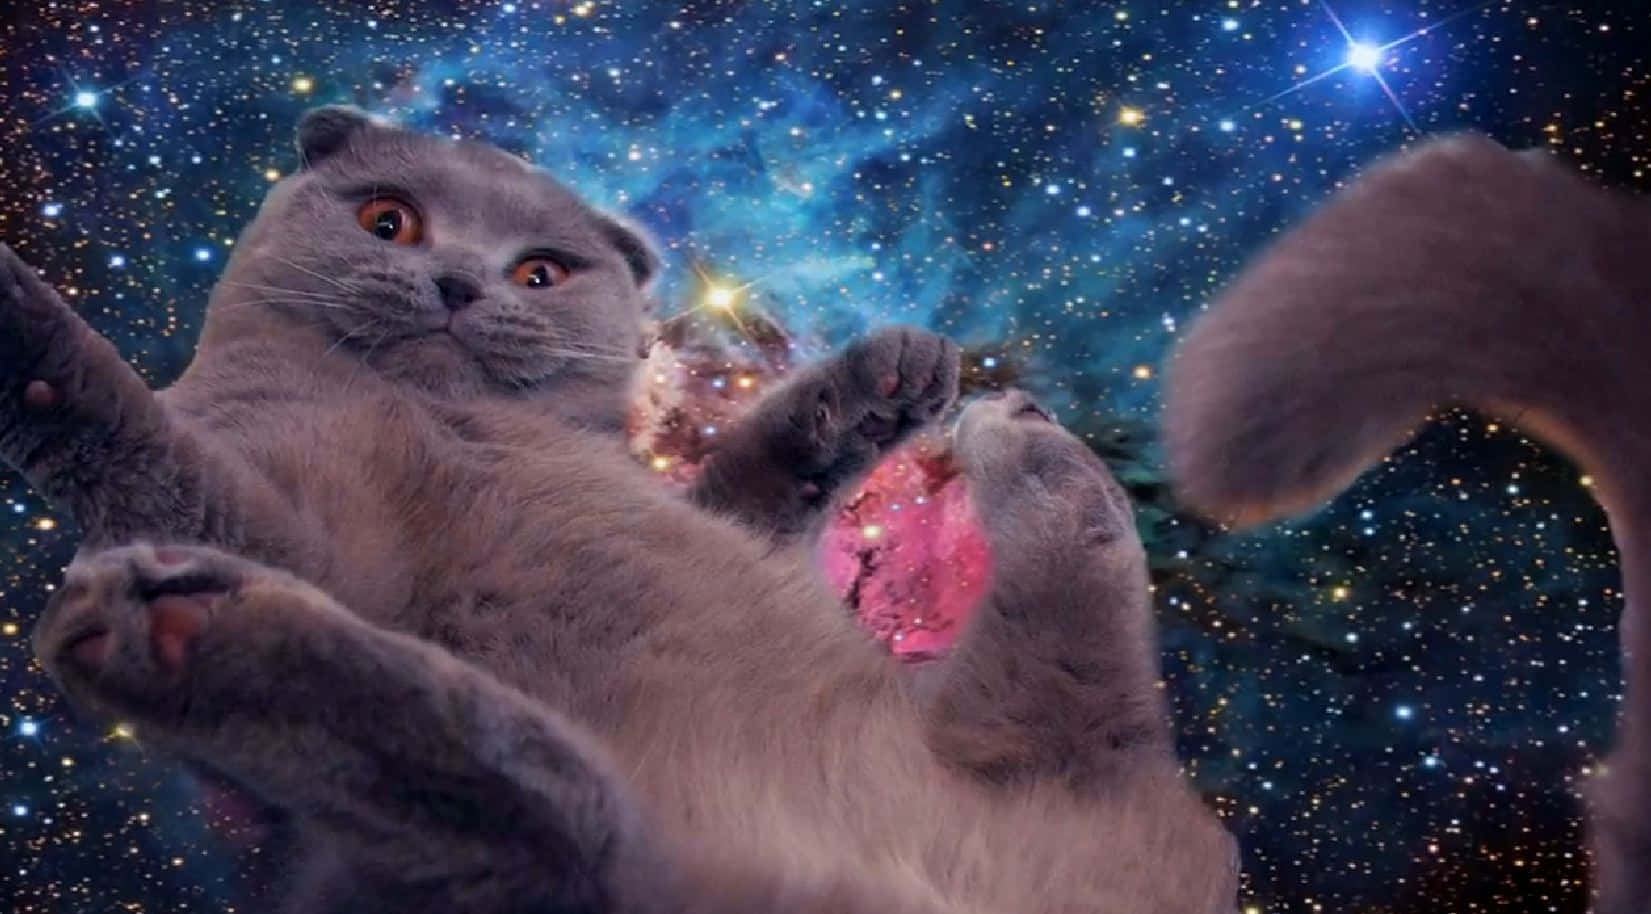 This cat is out of this world! Wallpaper